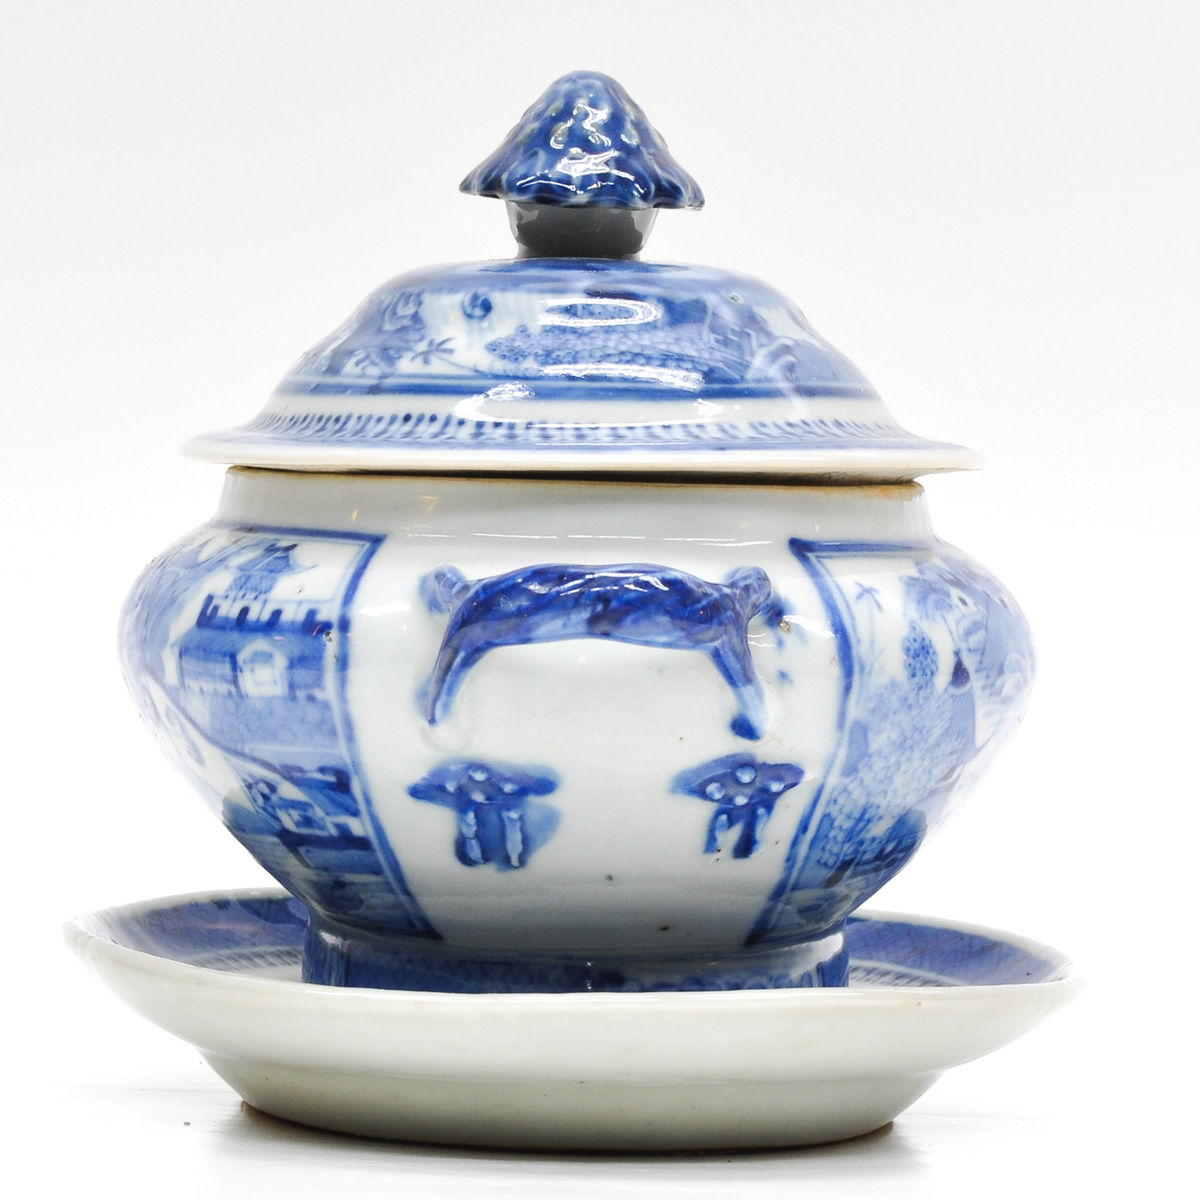 A Blue and White Decor Tureen and Tray - Image 2 of 8